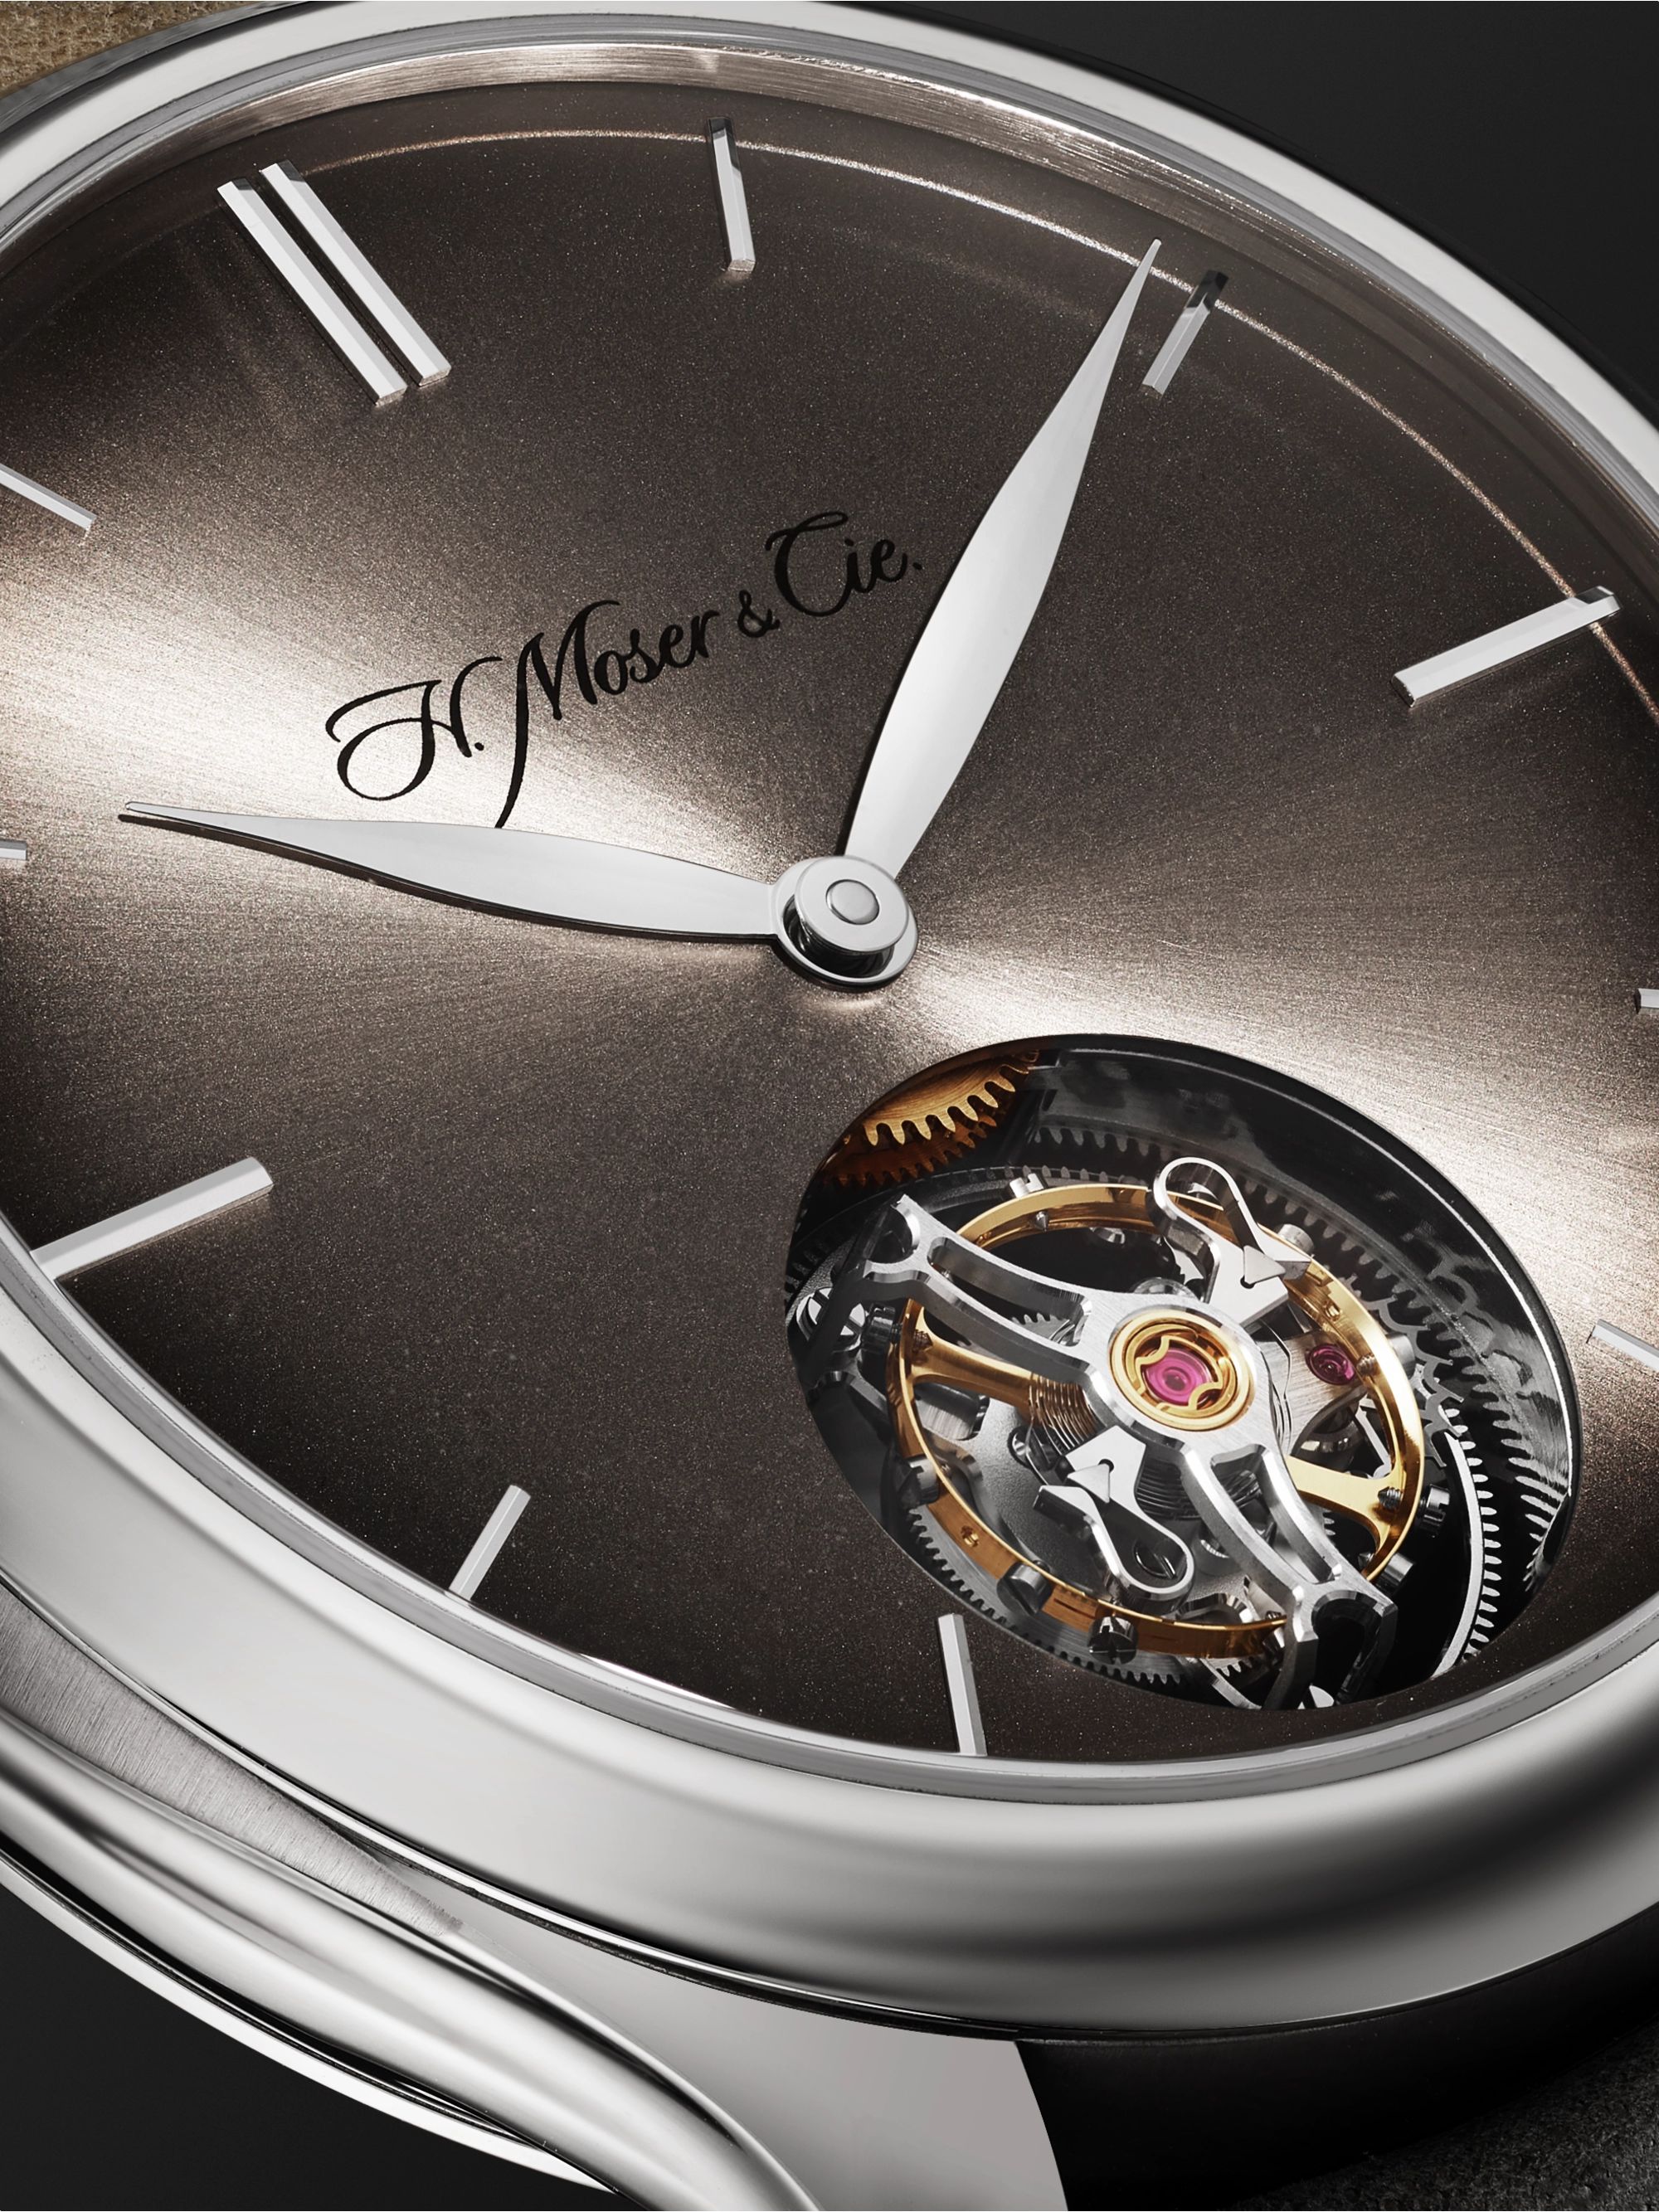 H. MOSER & CIE. Endeavour Automatic Tourbillon 42mm 18-Karat White Gold and Leather Watch, Ref. No. 1804-0201